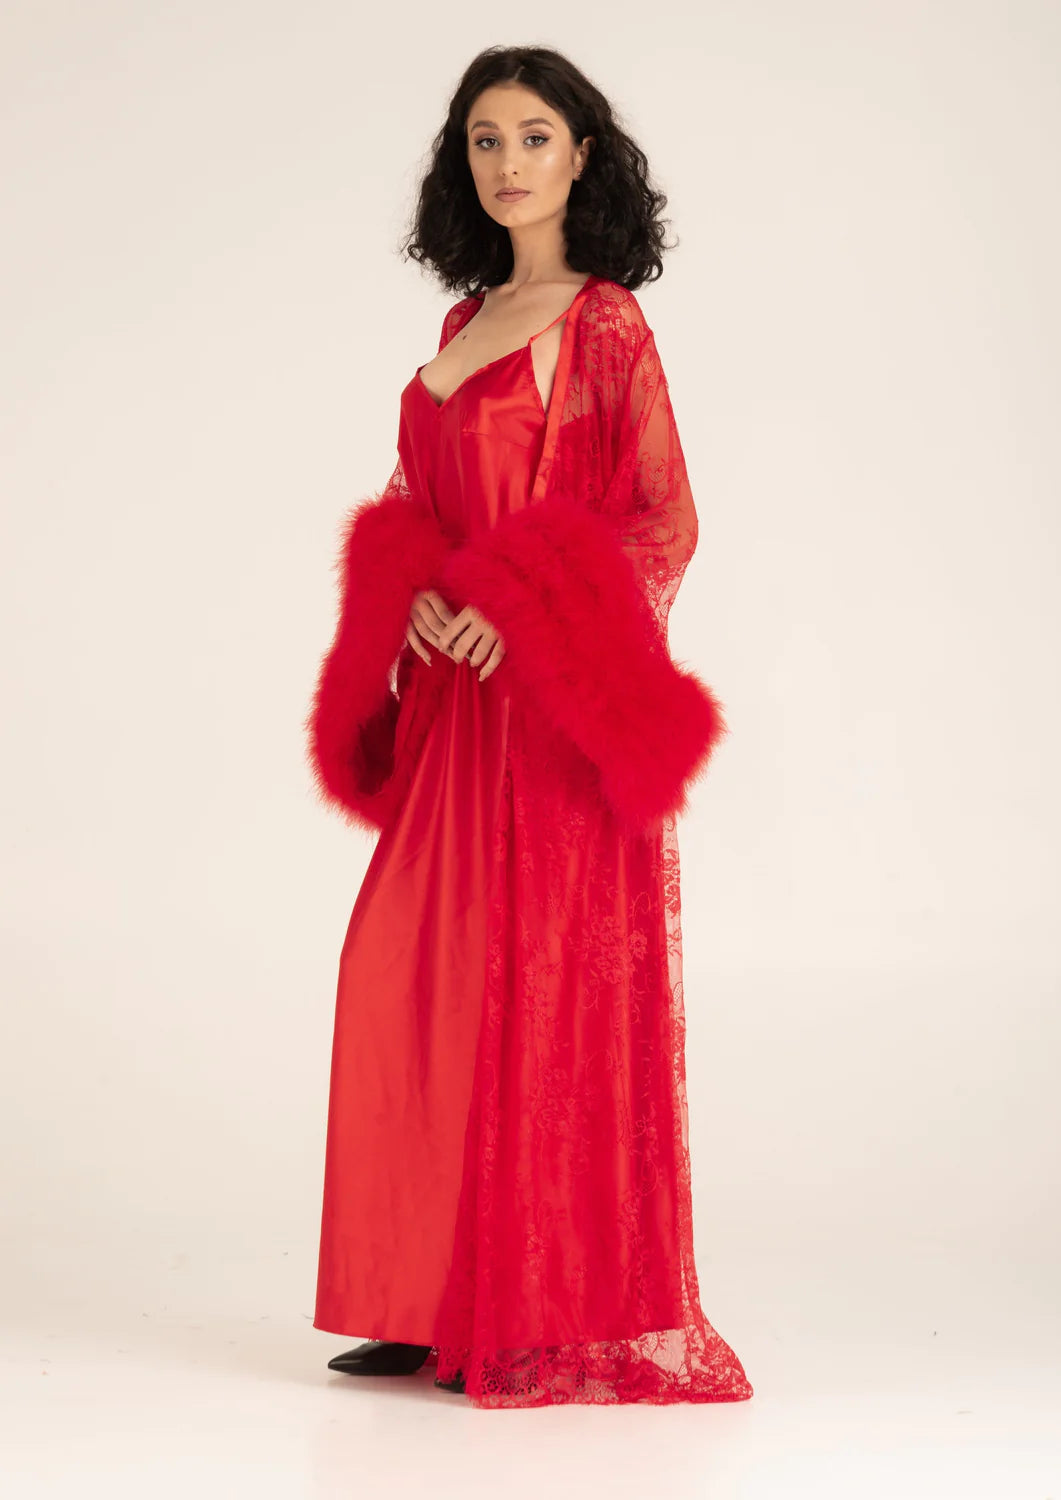 Red Widow Robe and Nightgown Set